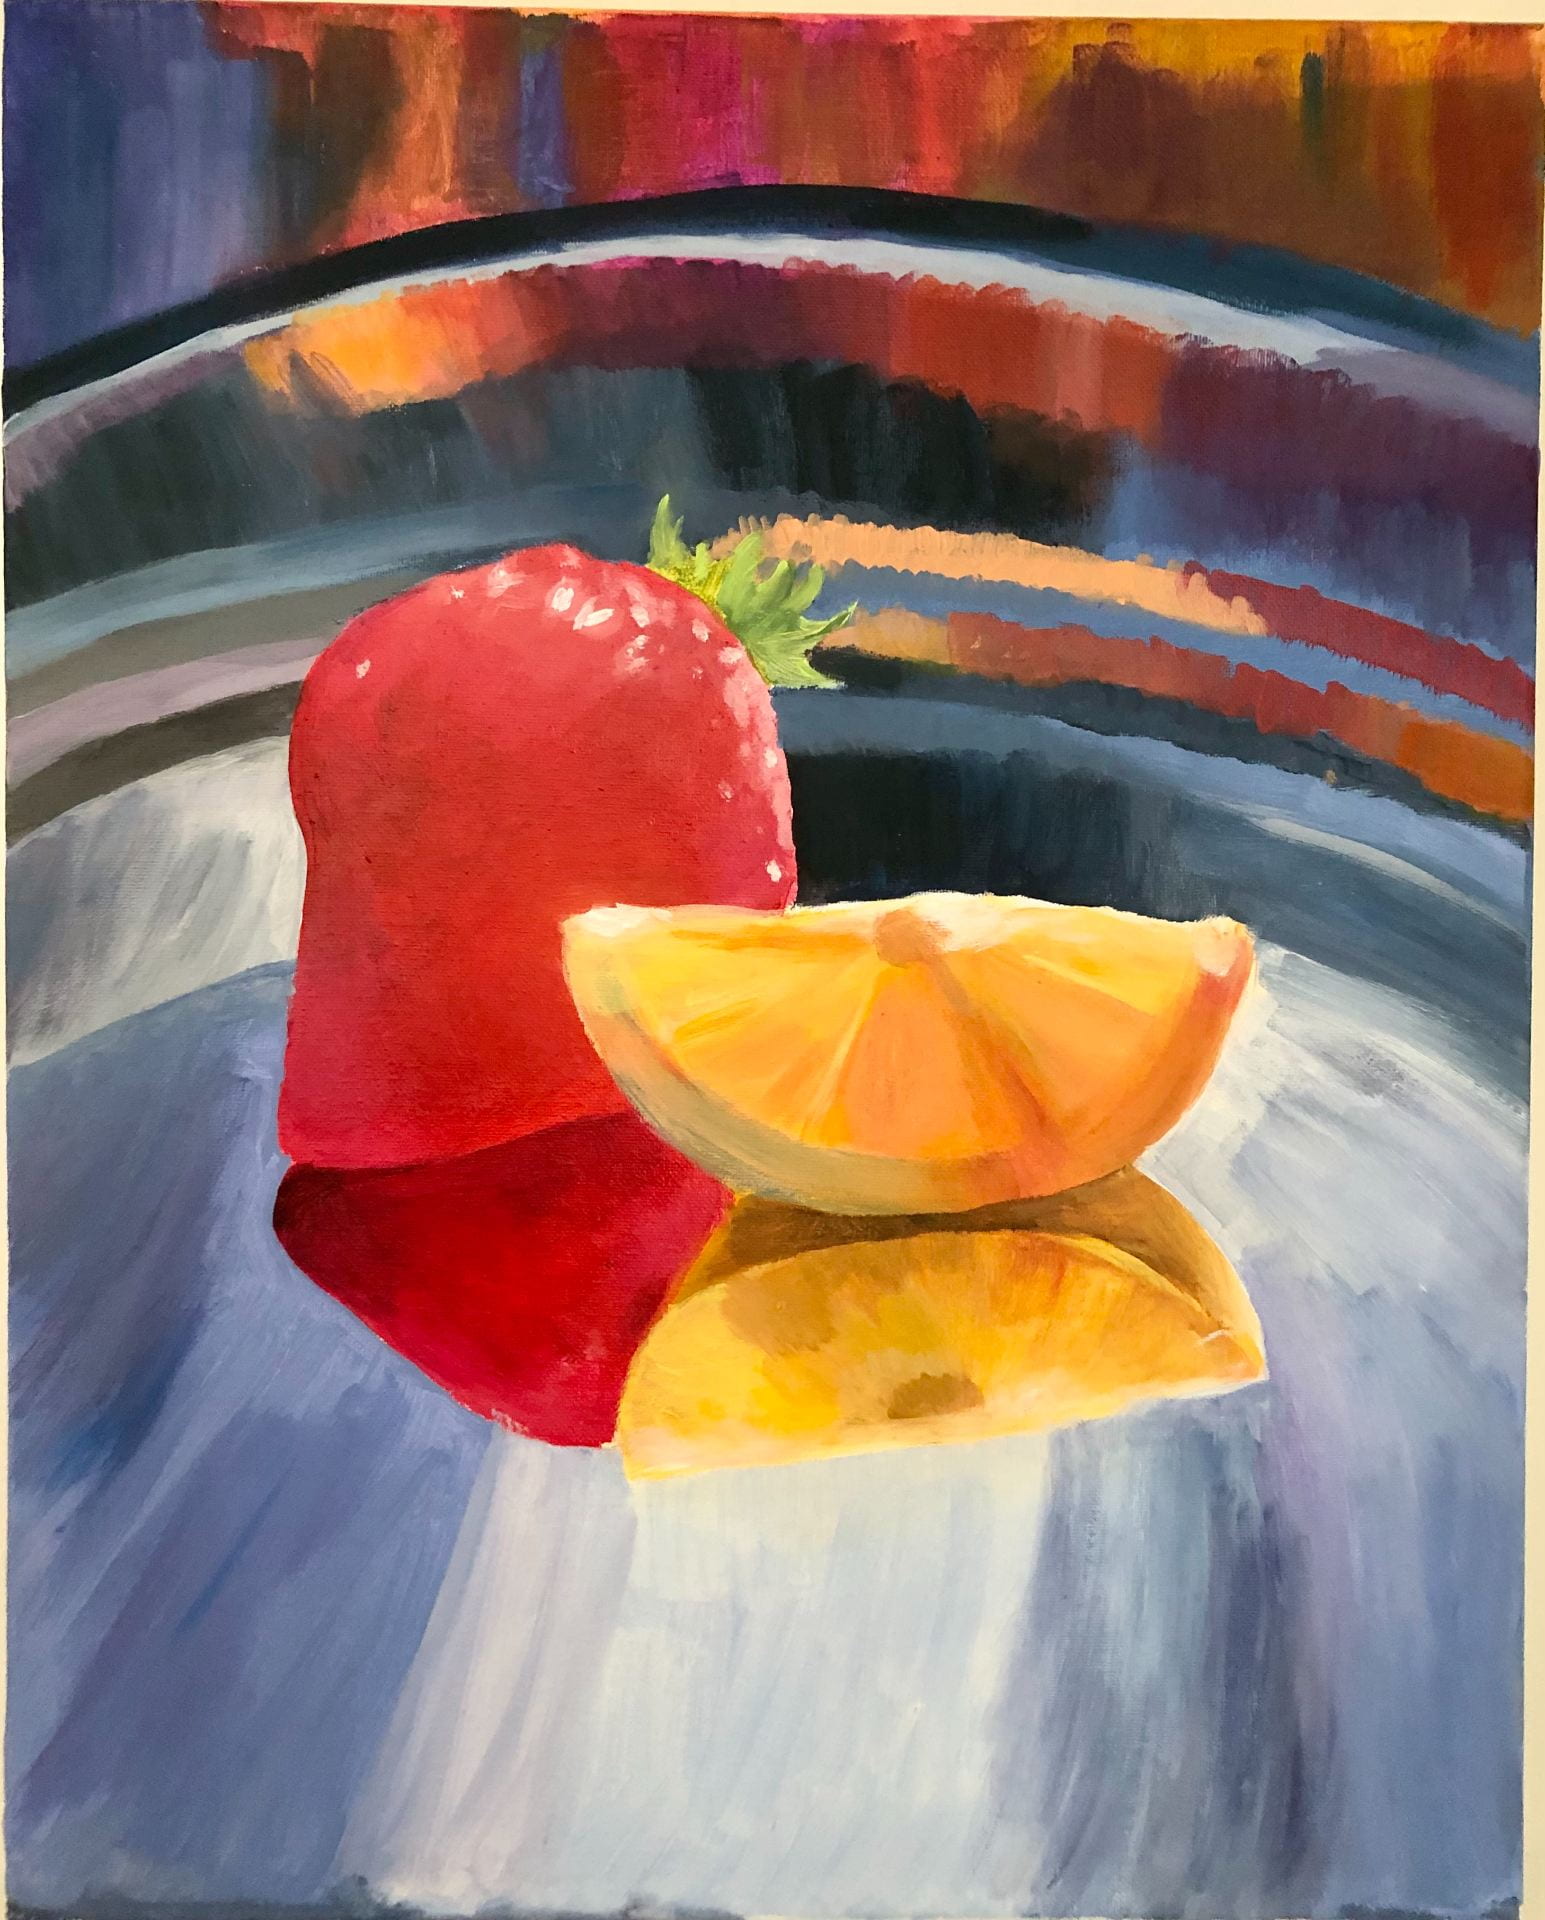 Painting of a strawberry and lemon slice on a shiny surface